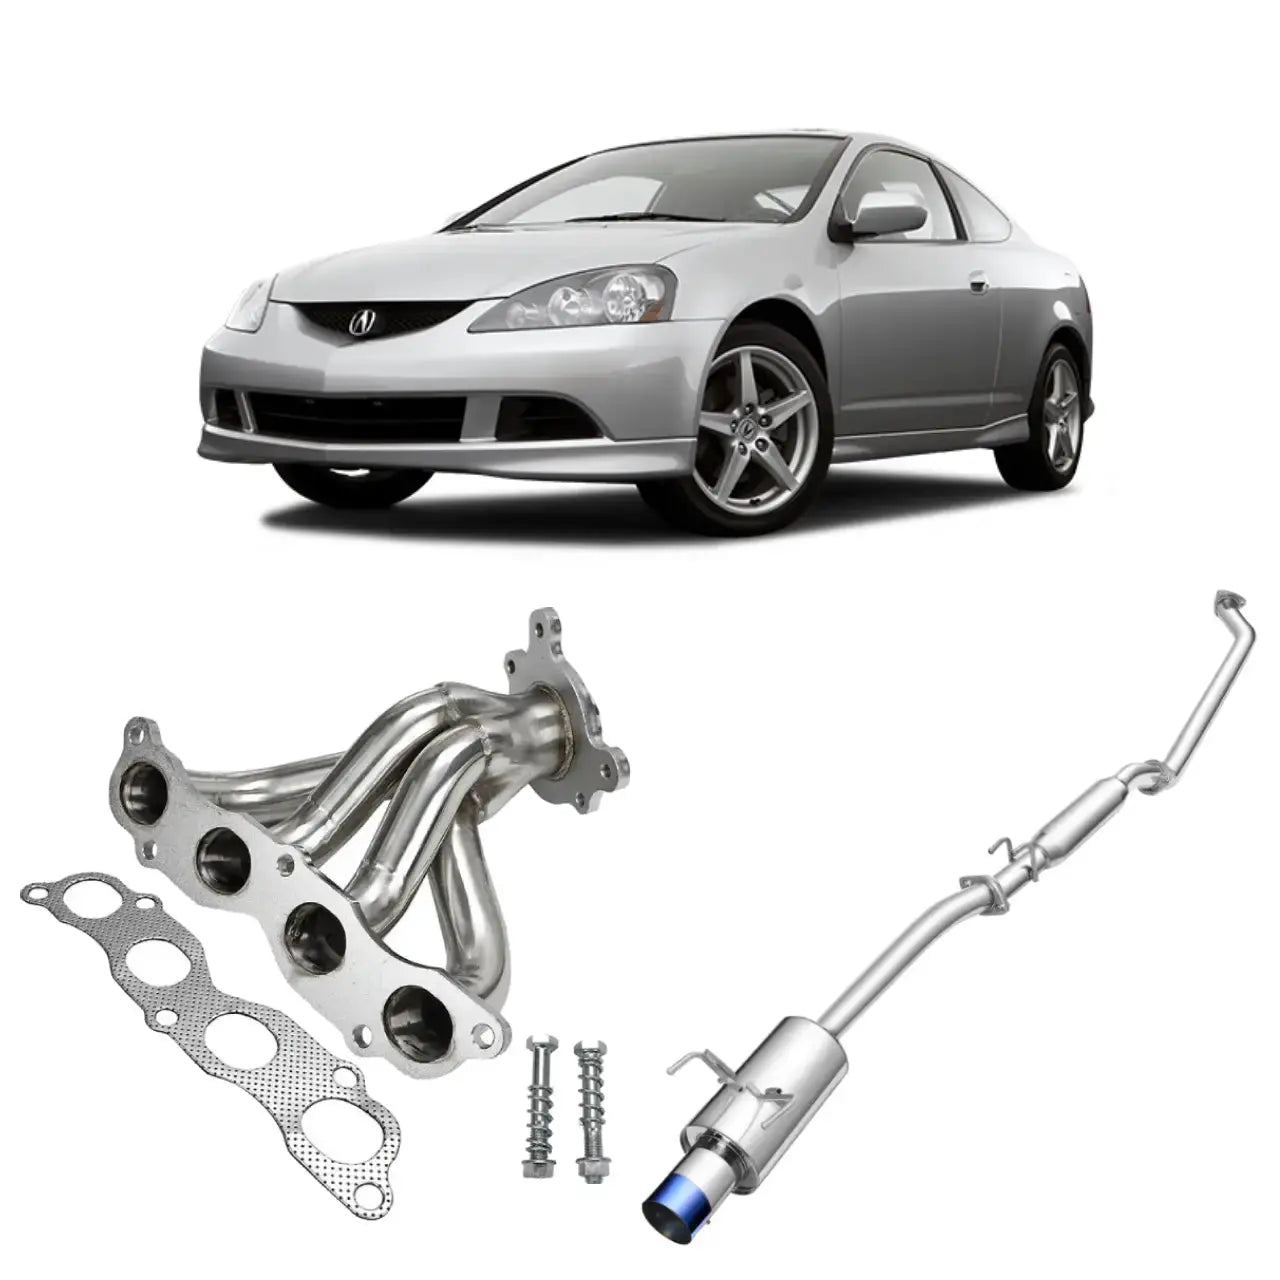 2002-2005 Honda Civic Si 2.0L Exhaust Header/Catback Exhaust All-In-One Kit Flashark